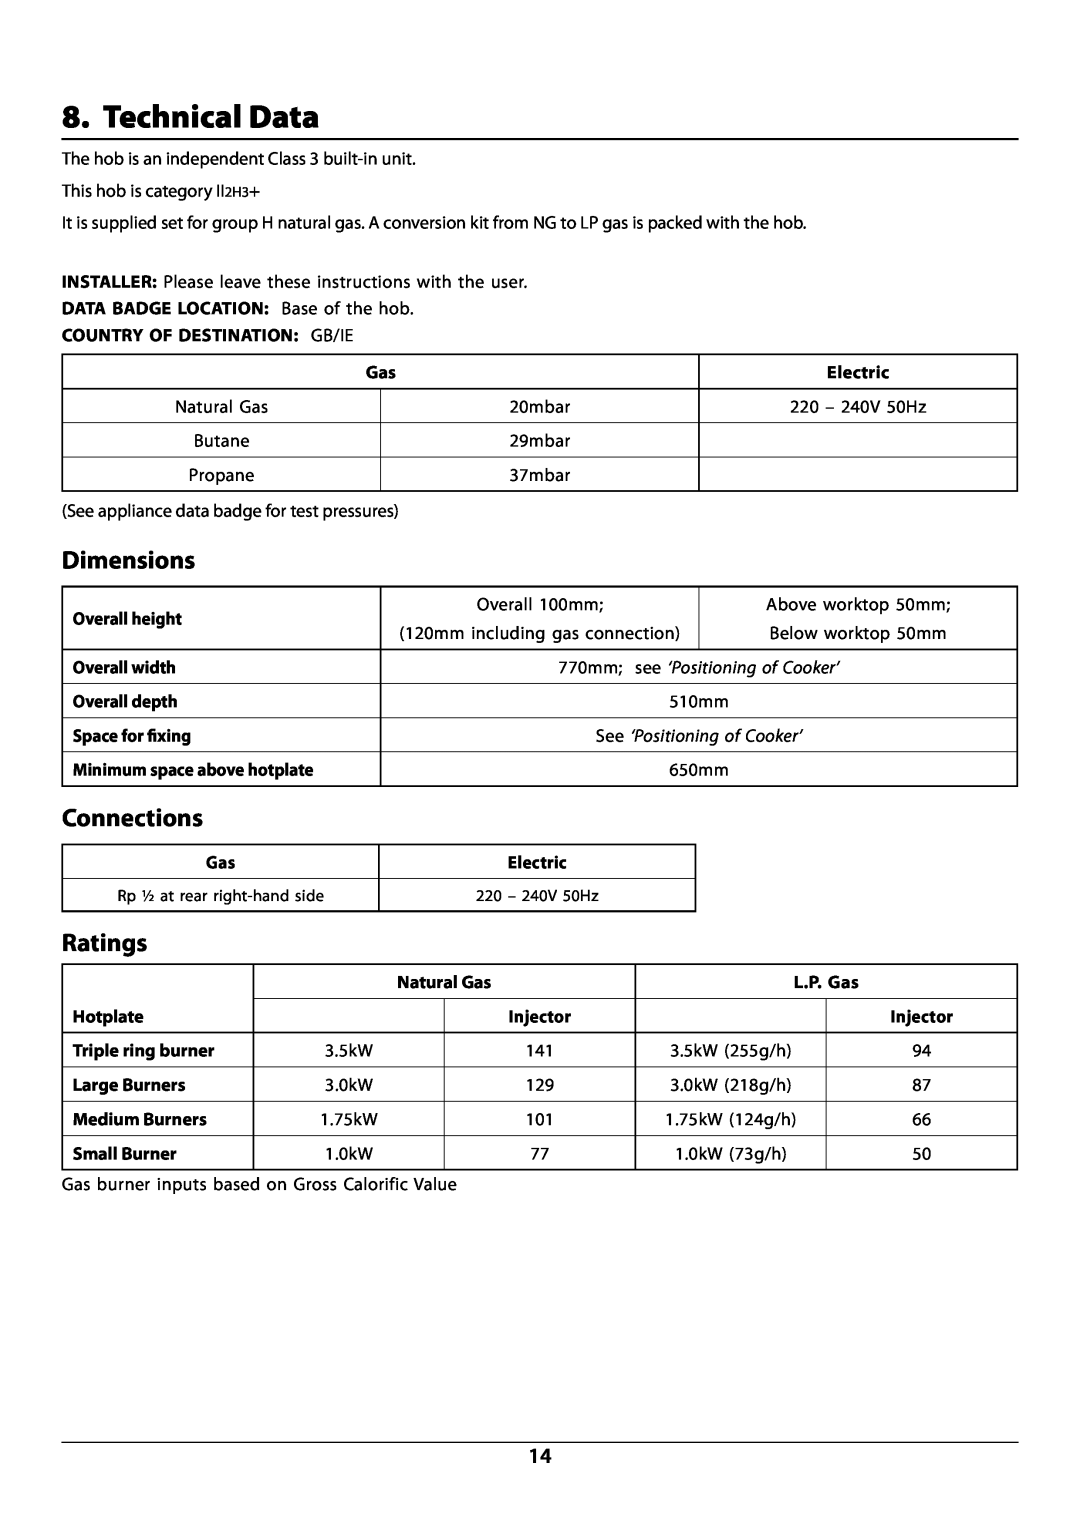 Rangemaster manual Technical Data, Dimensions, Connections, Ratings, DocNo.101-0004 - Technical data RGG77 gas, Electric 